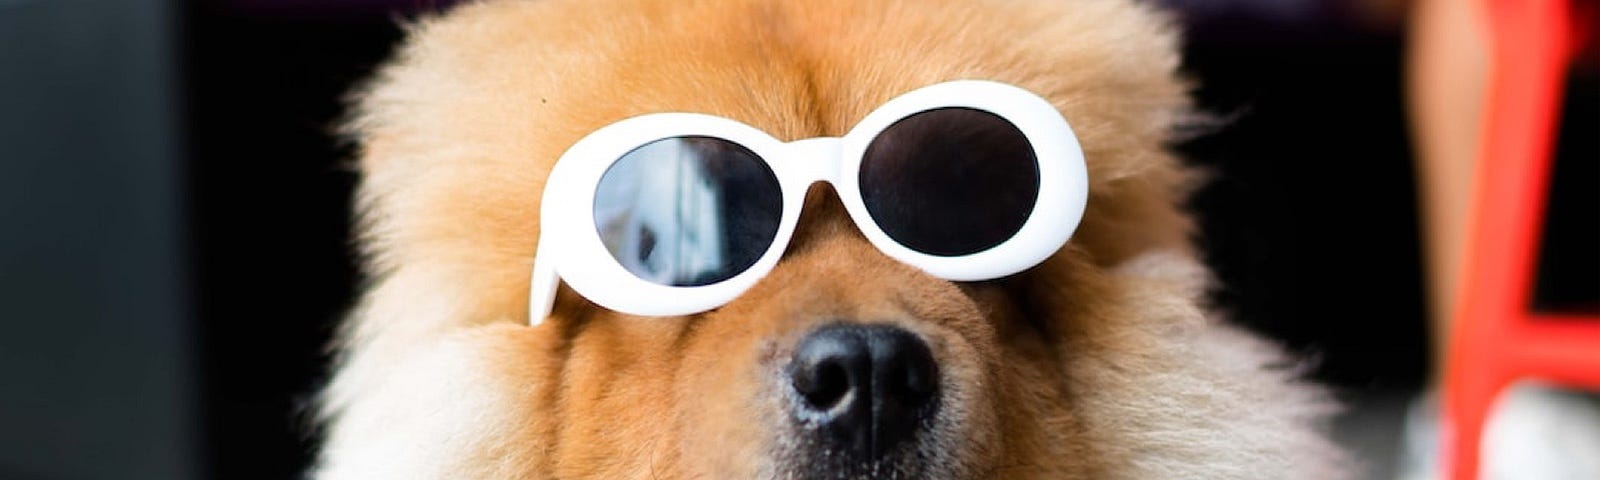 A fluffy orange dog wears some cool looking sunglasses.